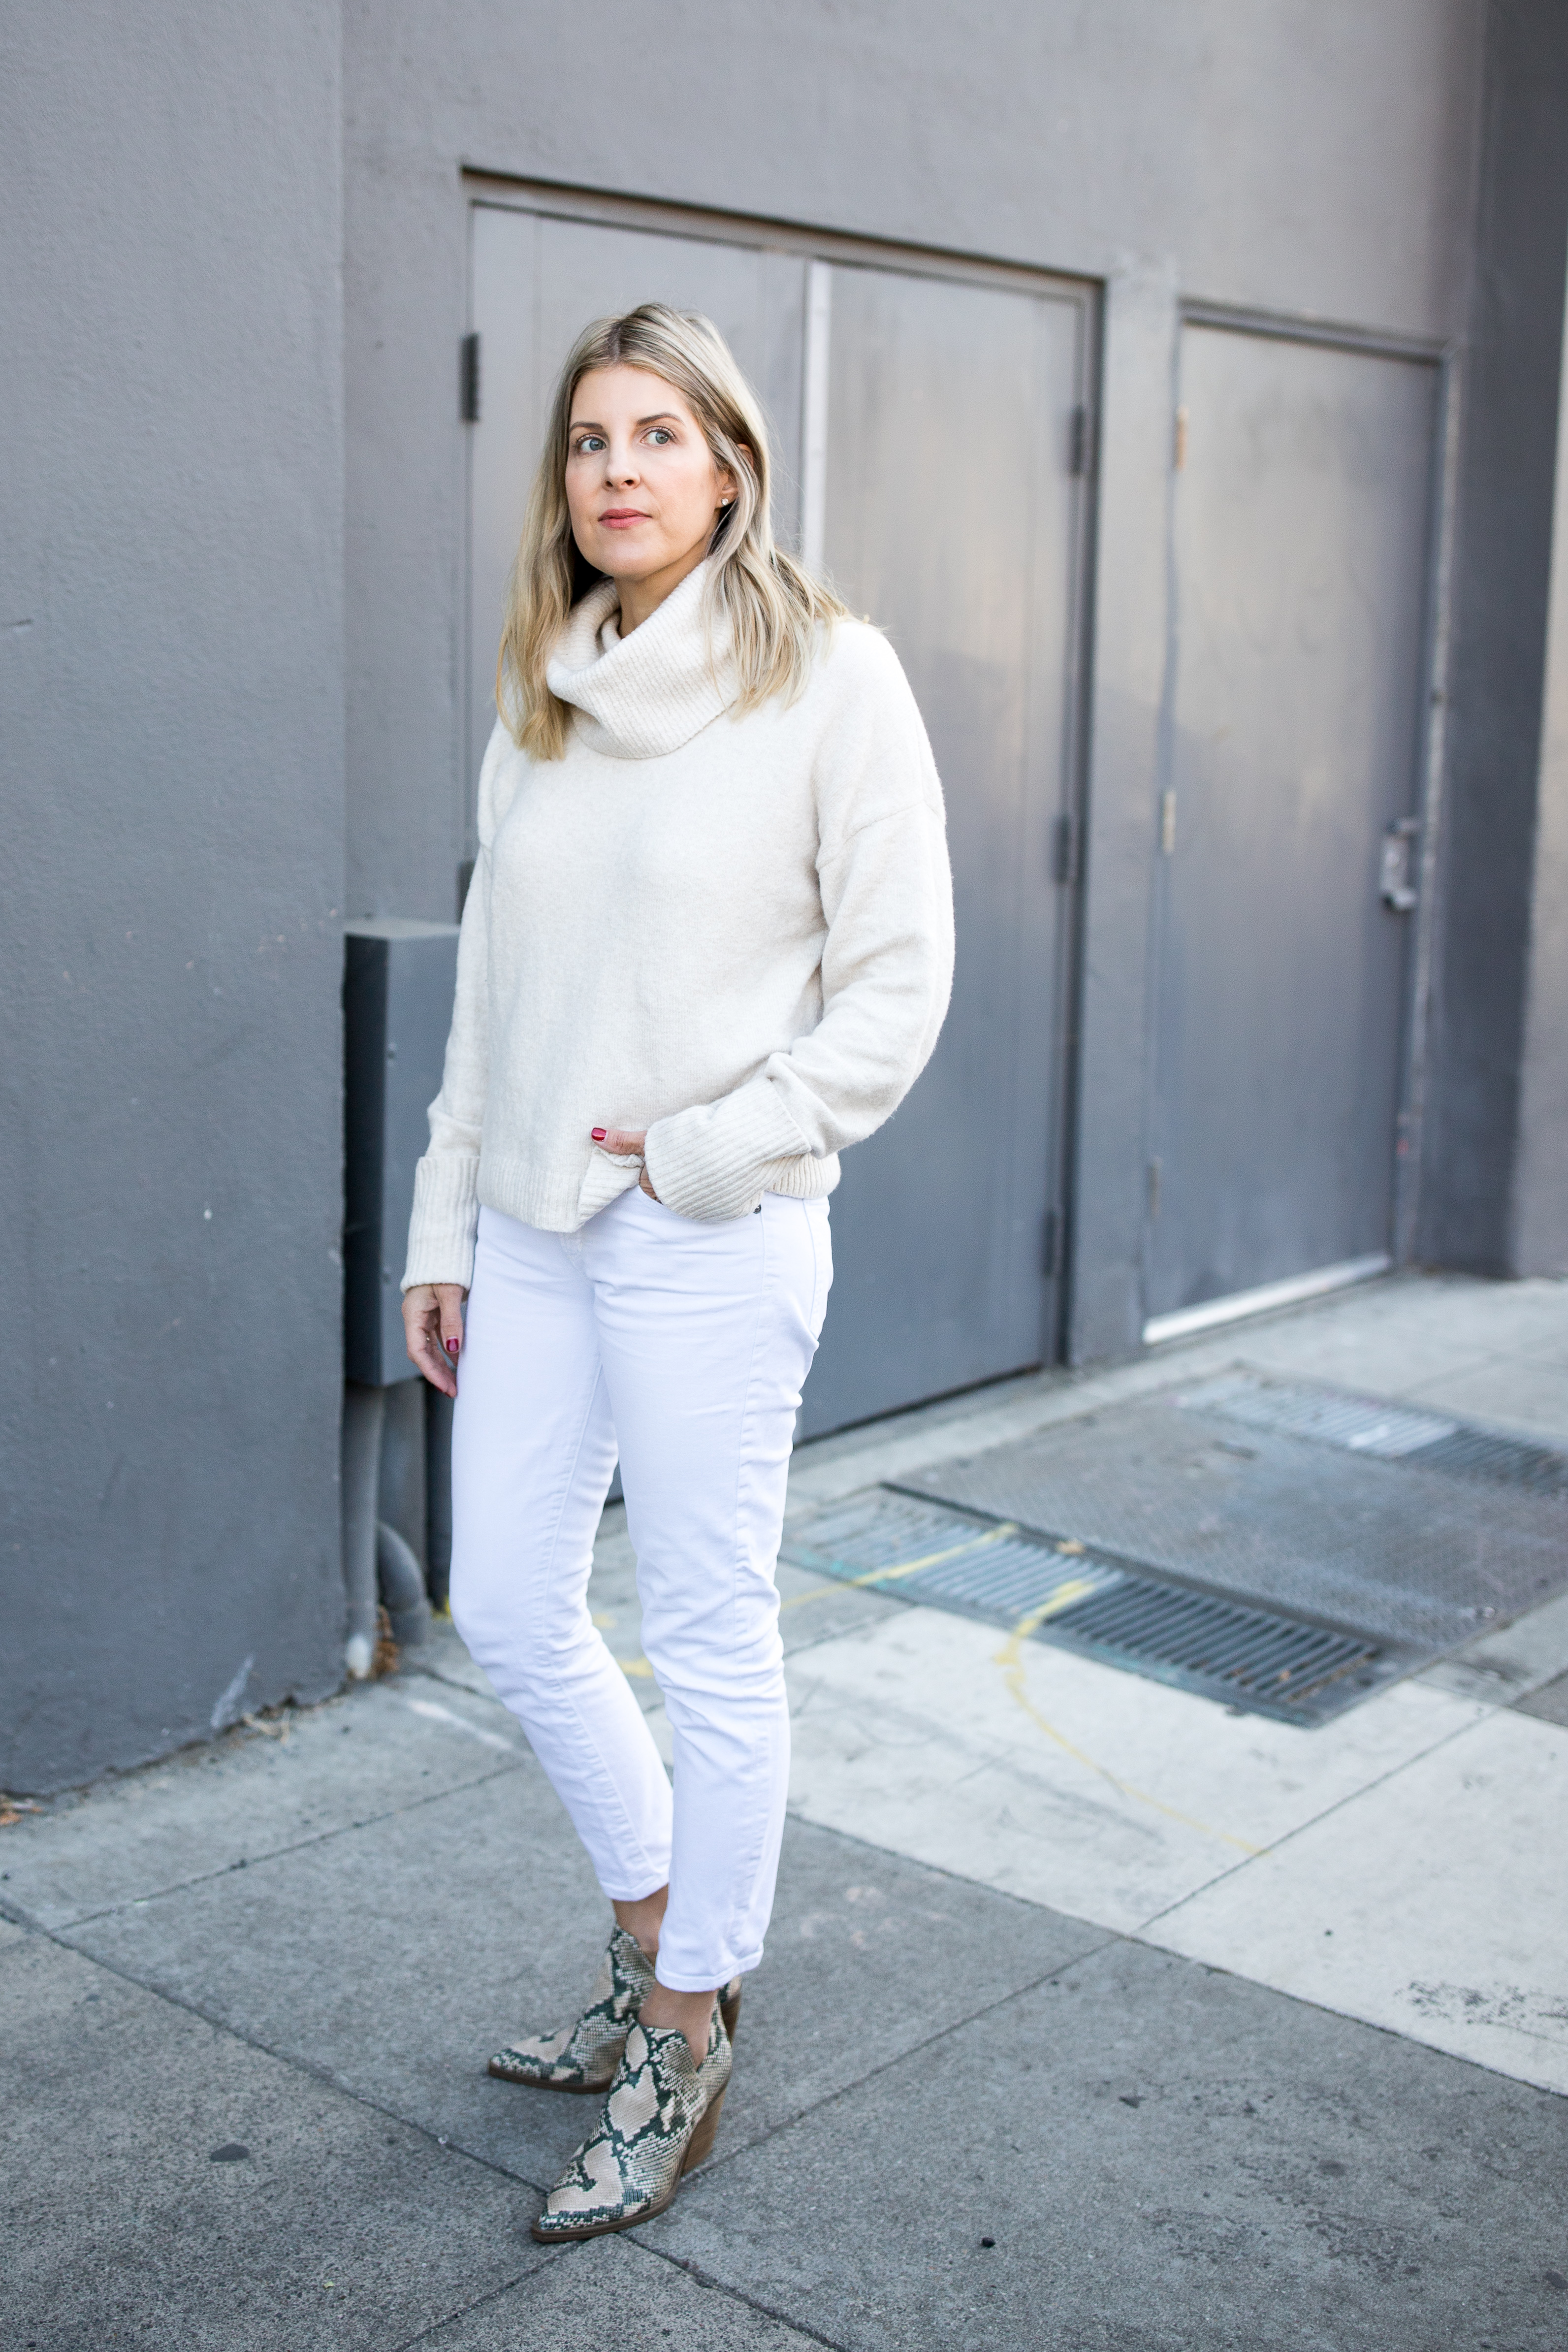 White Jeans After Labor Day4 · Abby Savvy